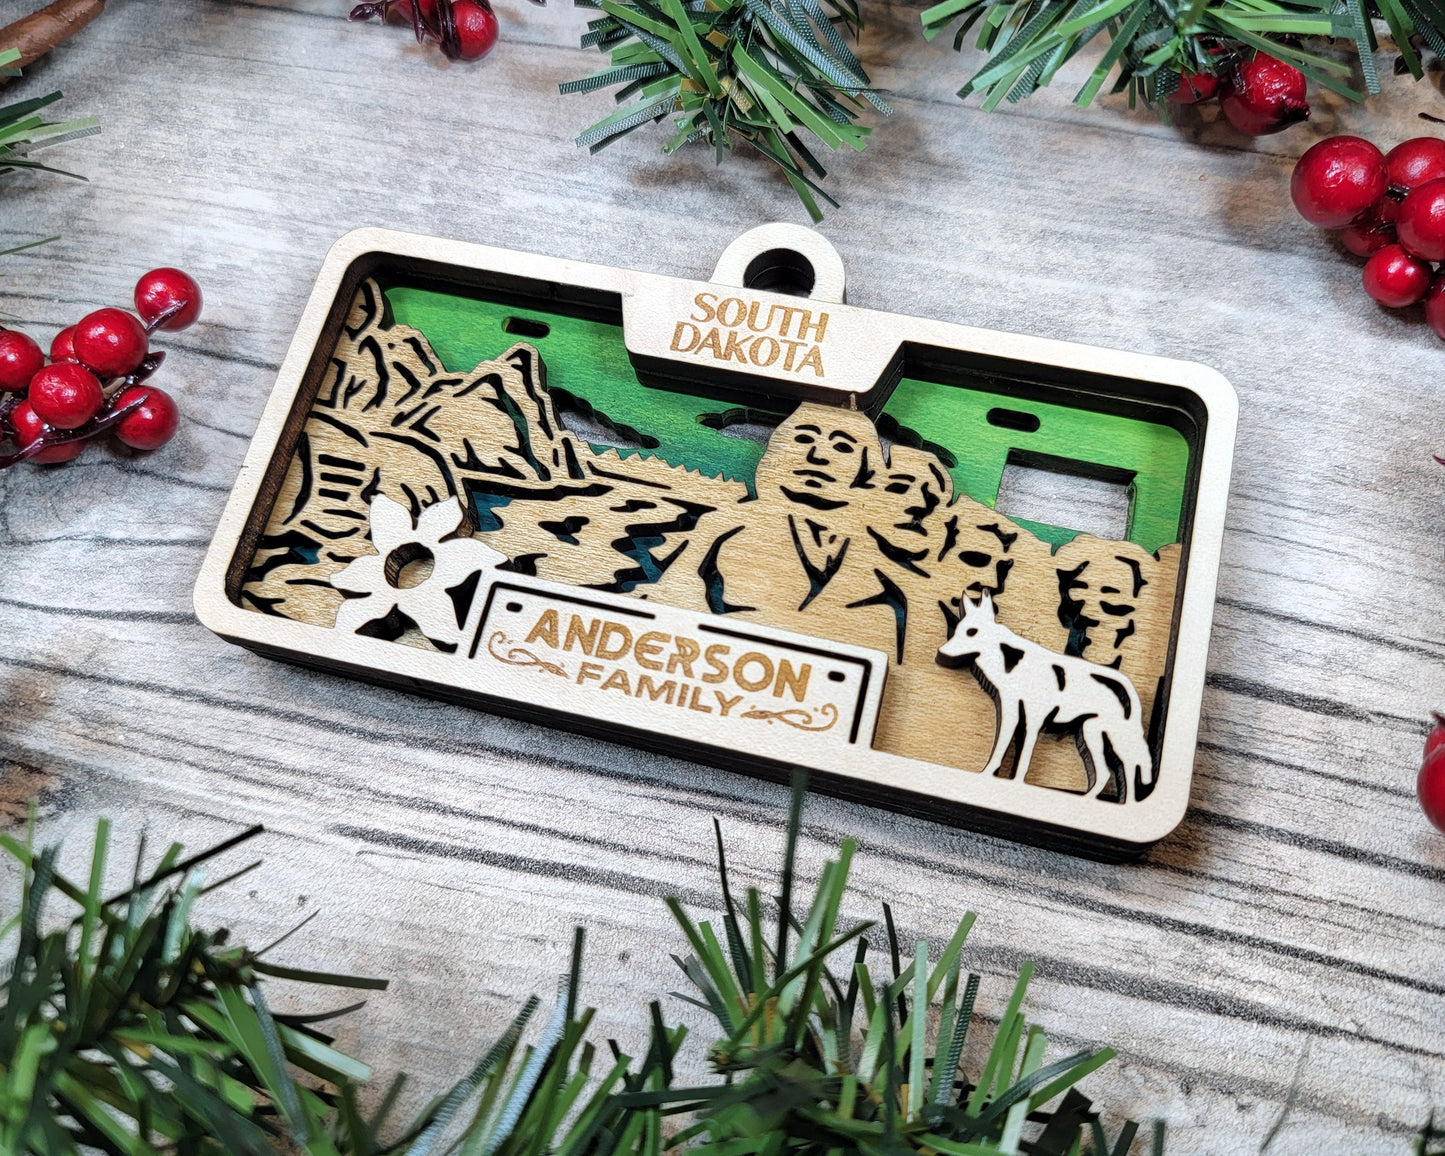 South Dakota State Plate Ornament and Signage - SVG File Download - Sized for Glowforge - Laser Ready Digital Files